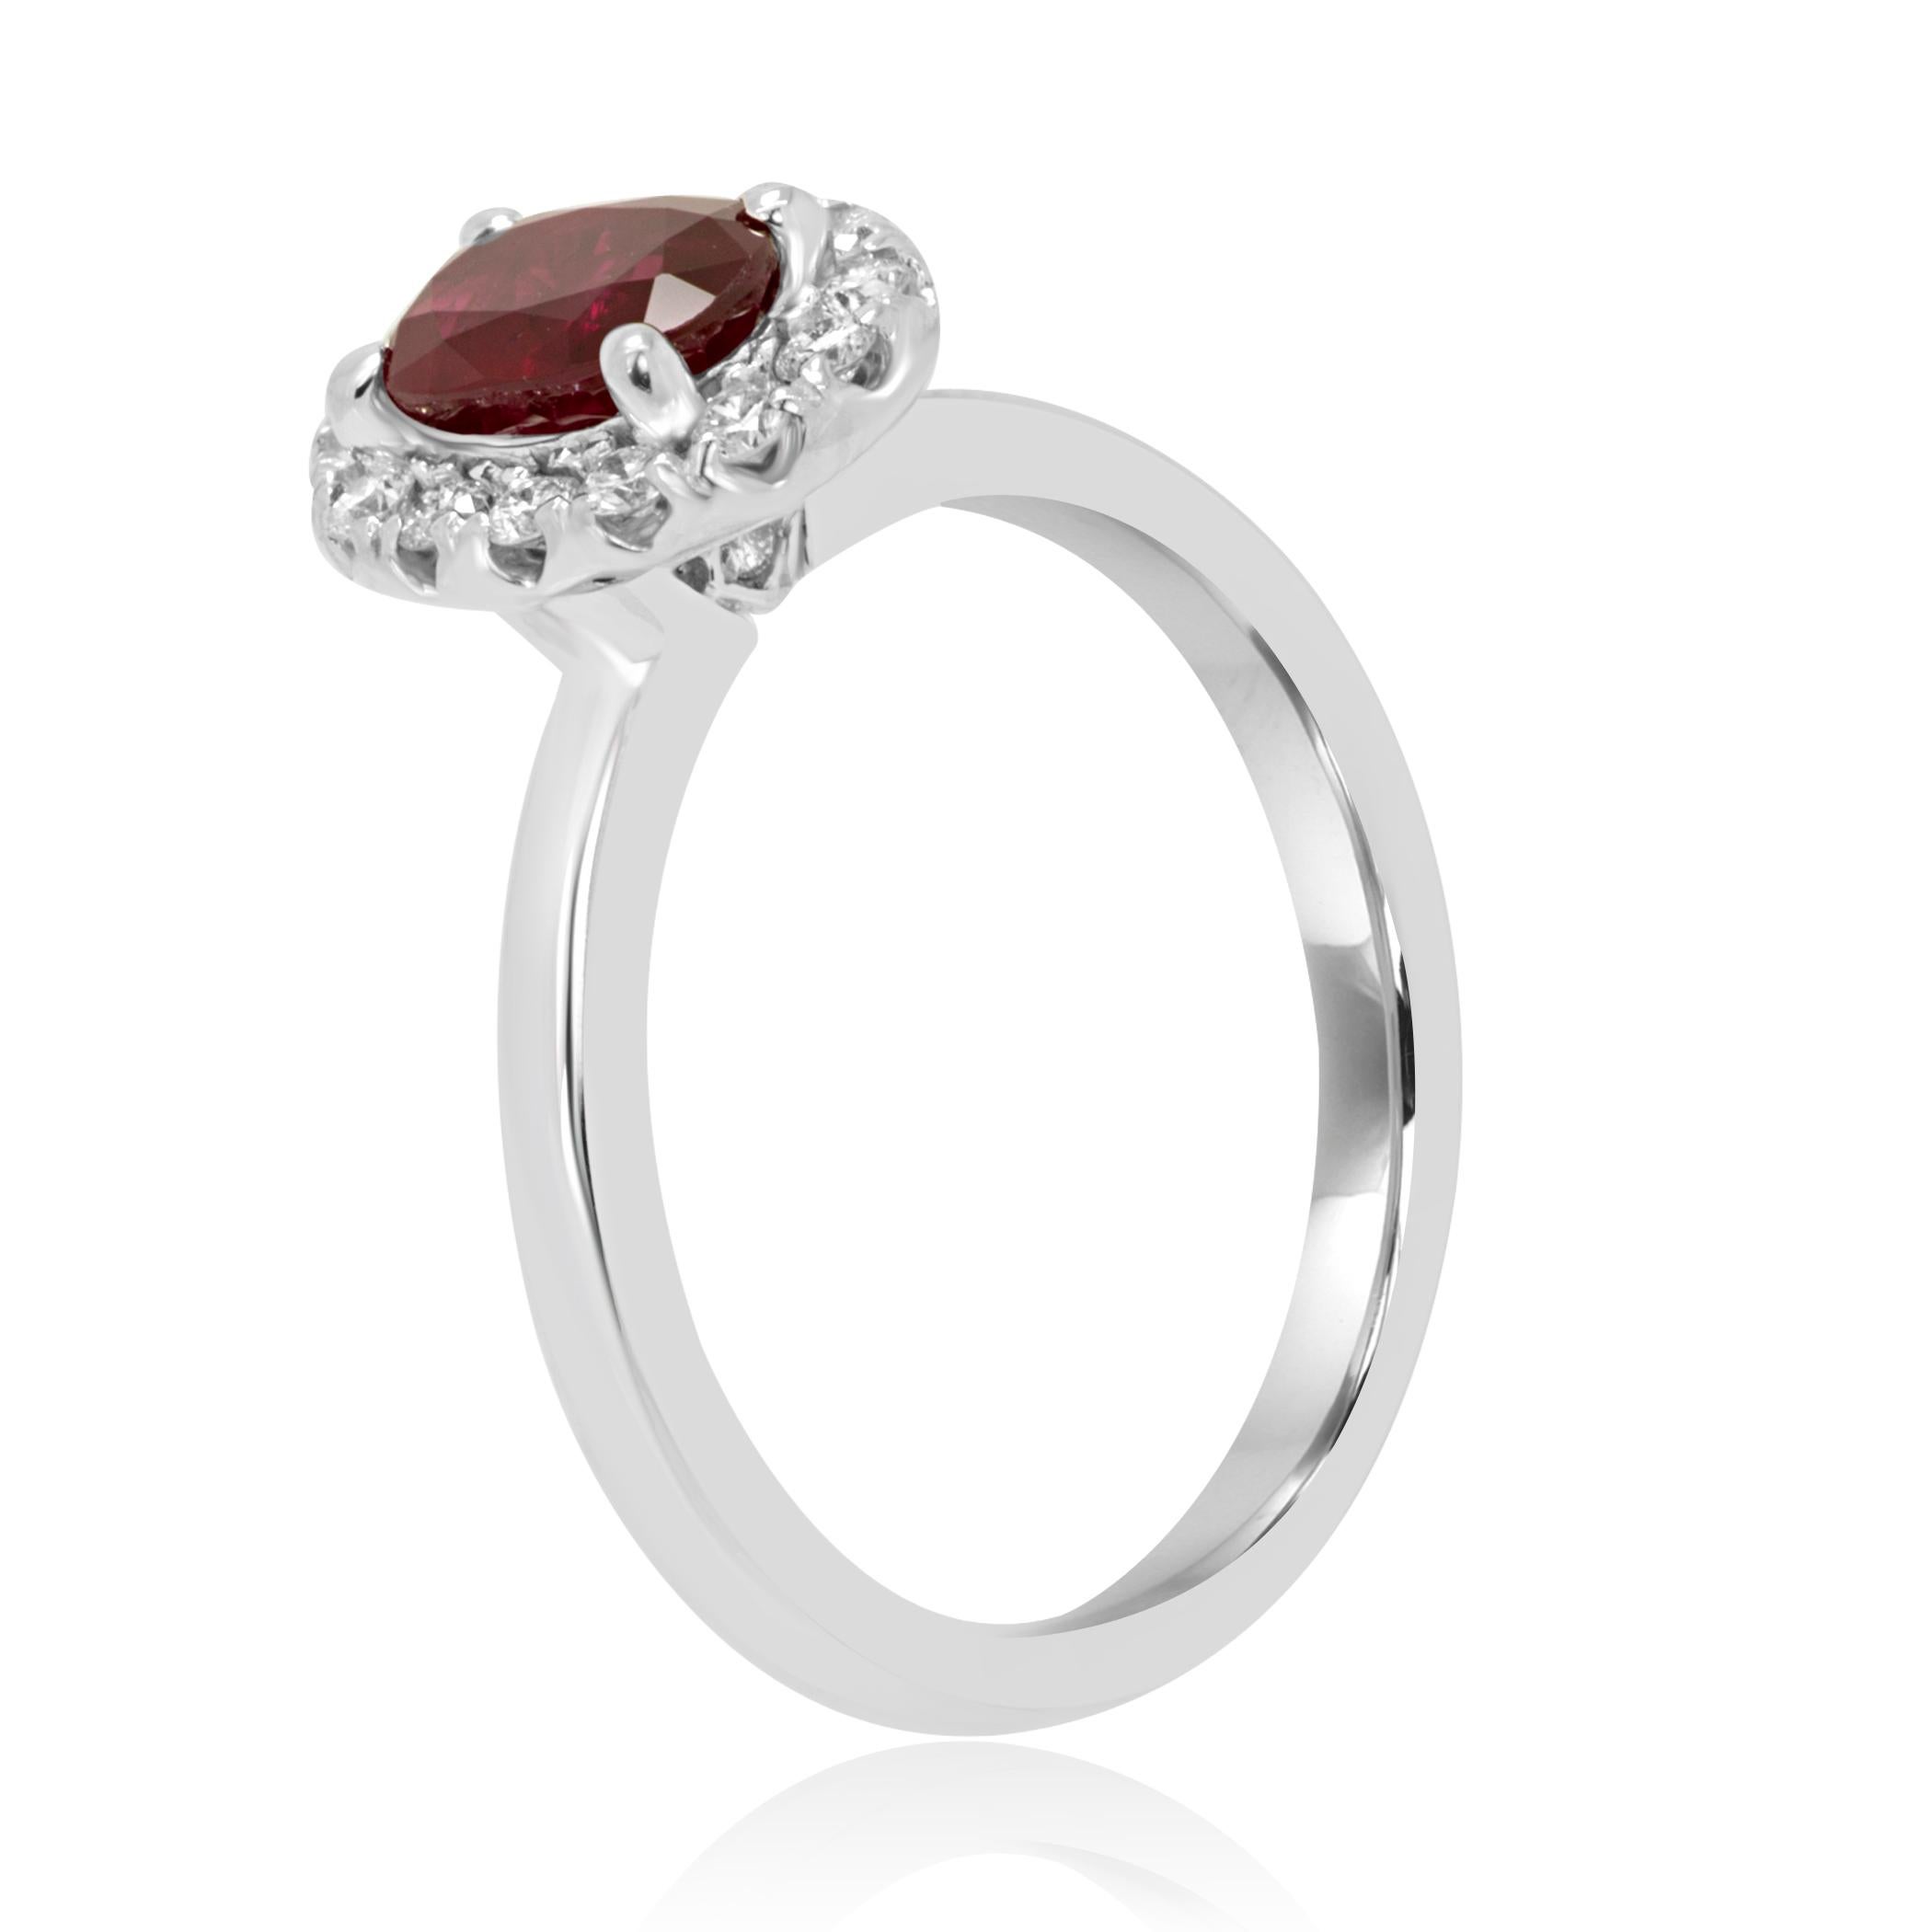 Stunning Ruby Oval 0.93 Carat Encircled in a single Halo of White G-H Color VS-SI Round Diamonds 0.25 Carat in Classic 14K White Gold Bridal Fashion Cocktail Ring. Total Weight 1.18 Carat.

Style available in different price ranges. Prices are based